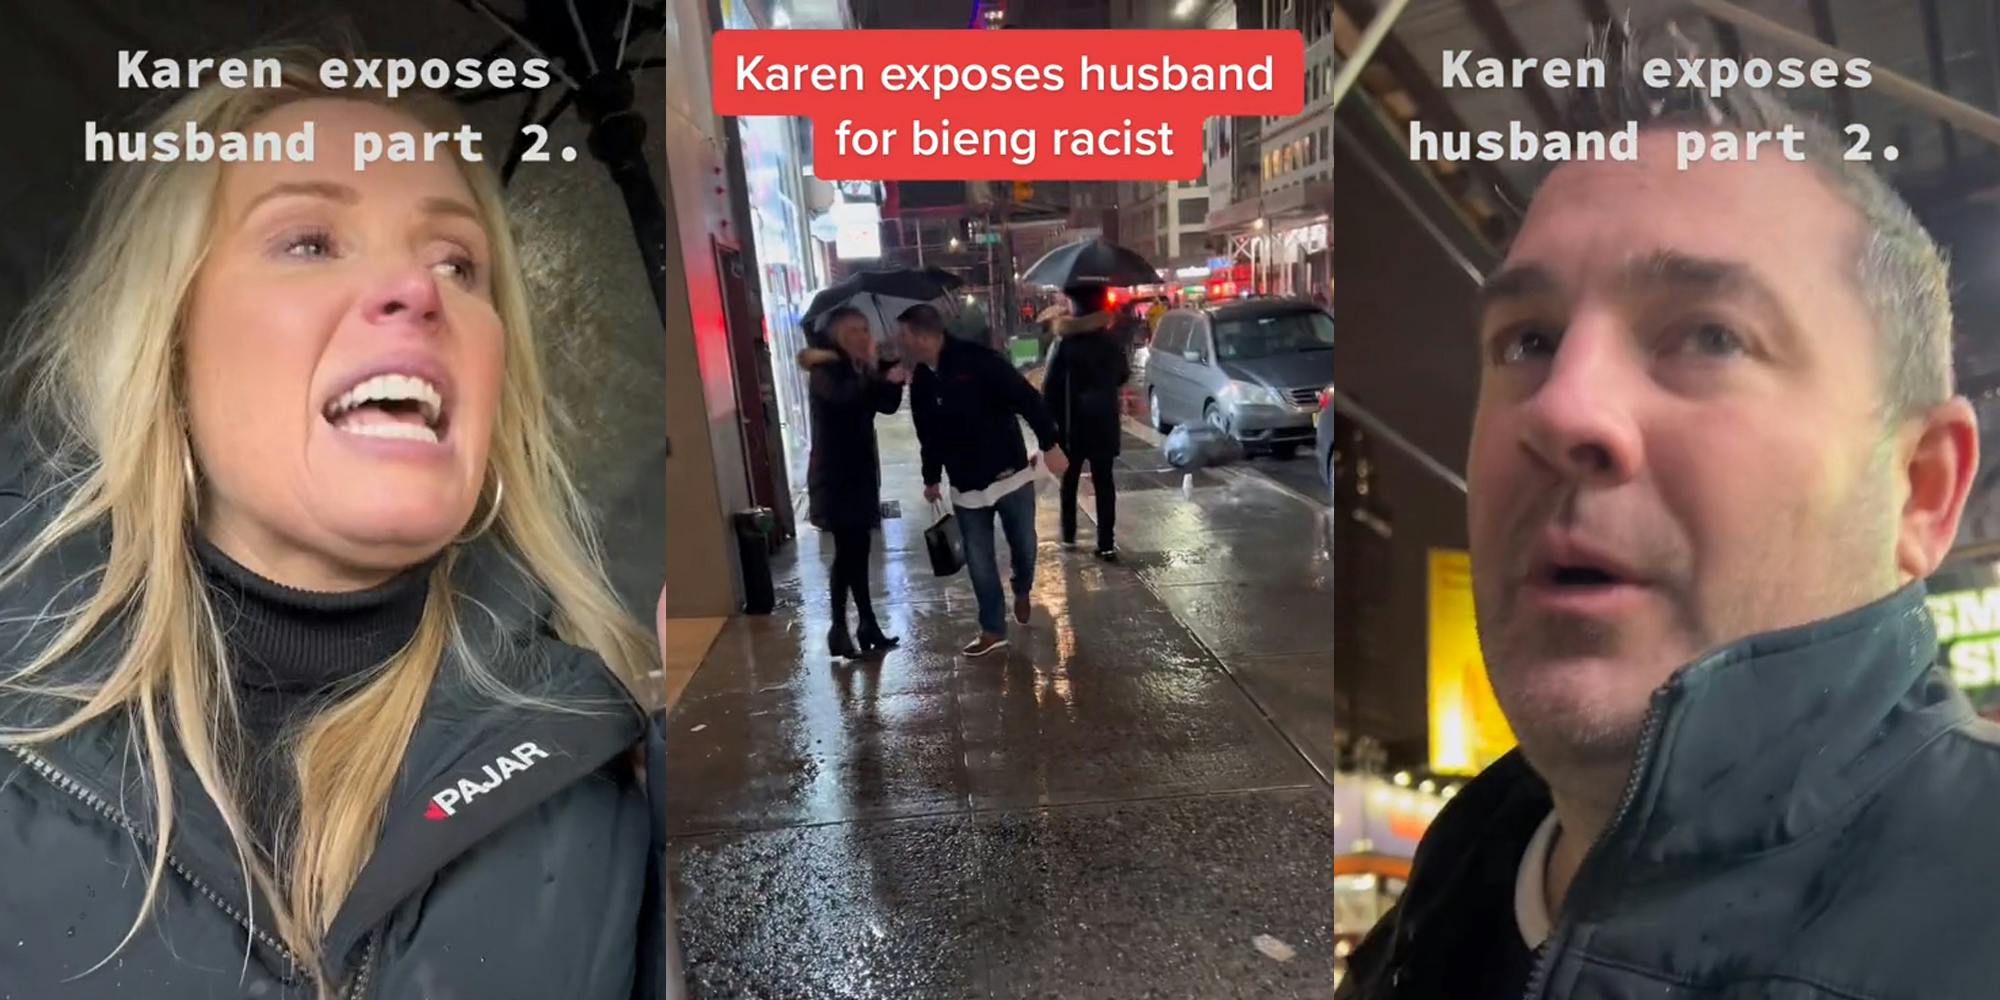 woman holding umbrella speaking caption "Karen exposes husband part 2." (l) man and women holding umbrella walking on sidewalk caption "Karen exposes husband for being racist" (c) man speaking outside caption "Karen exposes husband part 2." (r)